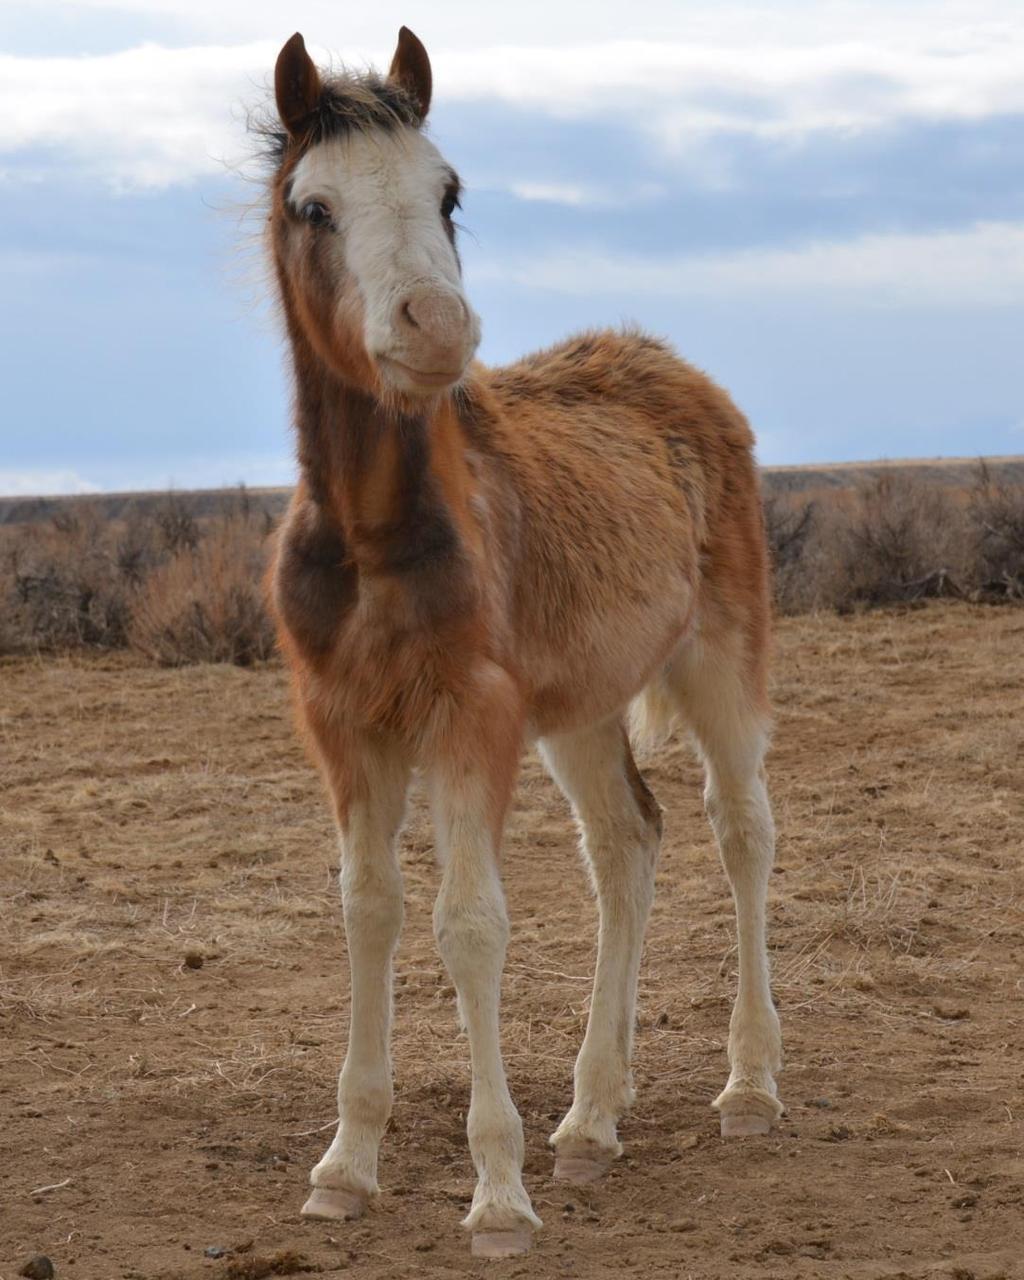 both upper and lower front incisors and flexible lips, allowing horses to crop vegetation closer to the ground than other ungulates (Photo Credit: BLM) Horses have physiological attributes that are